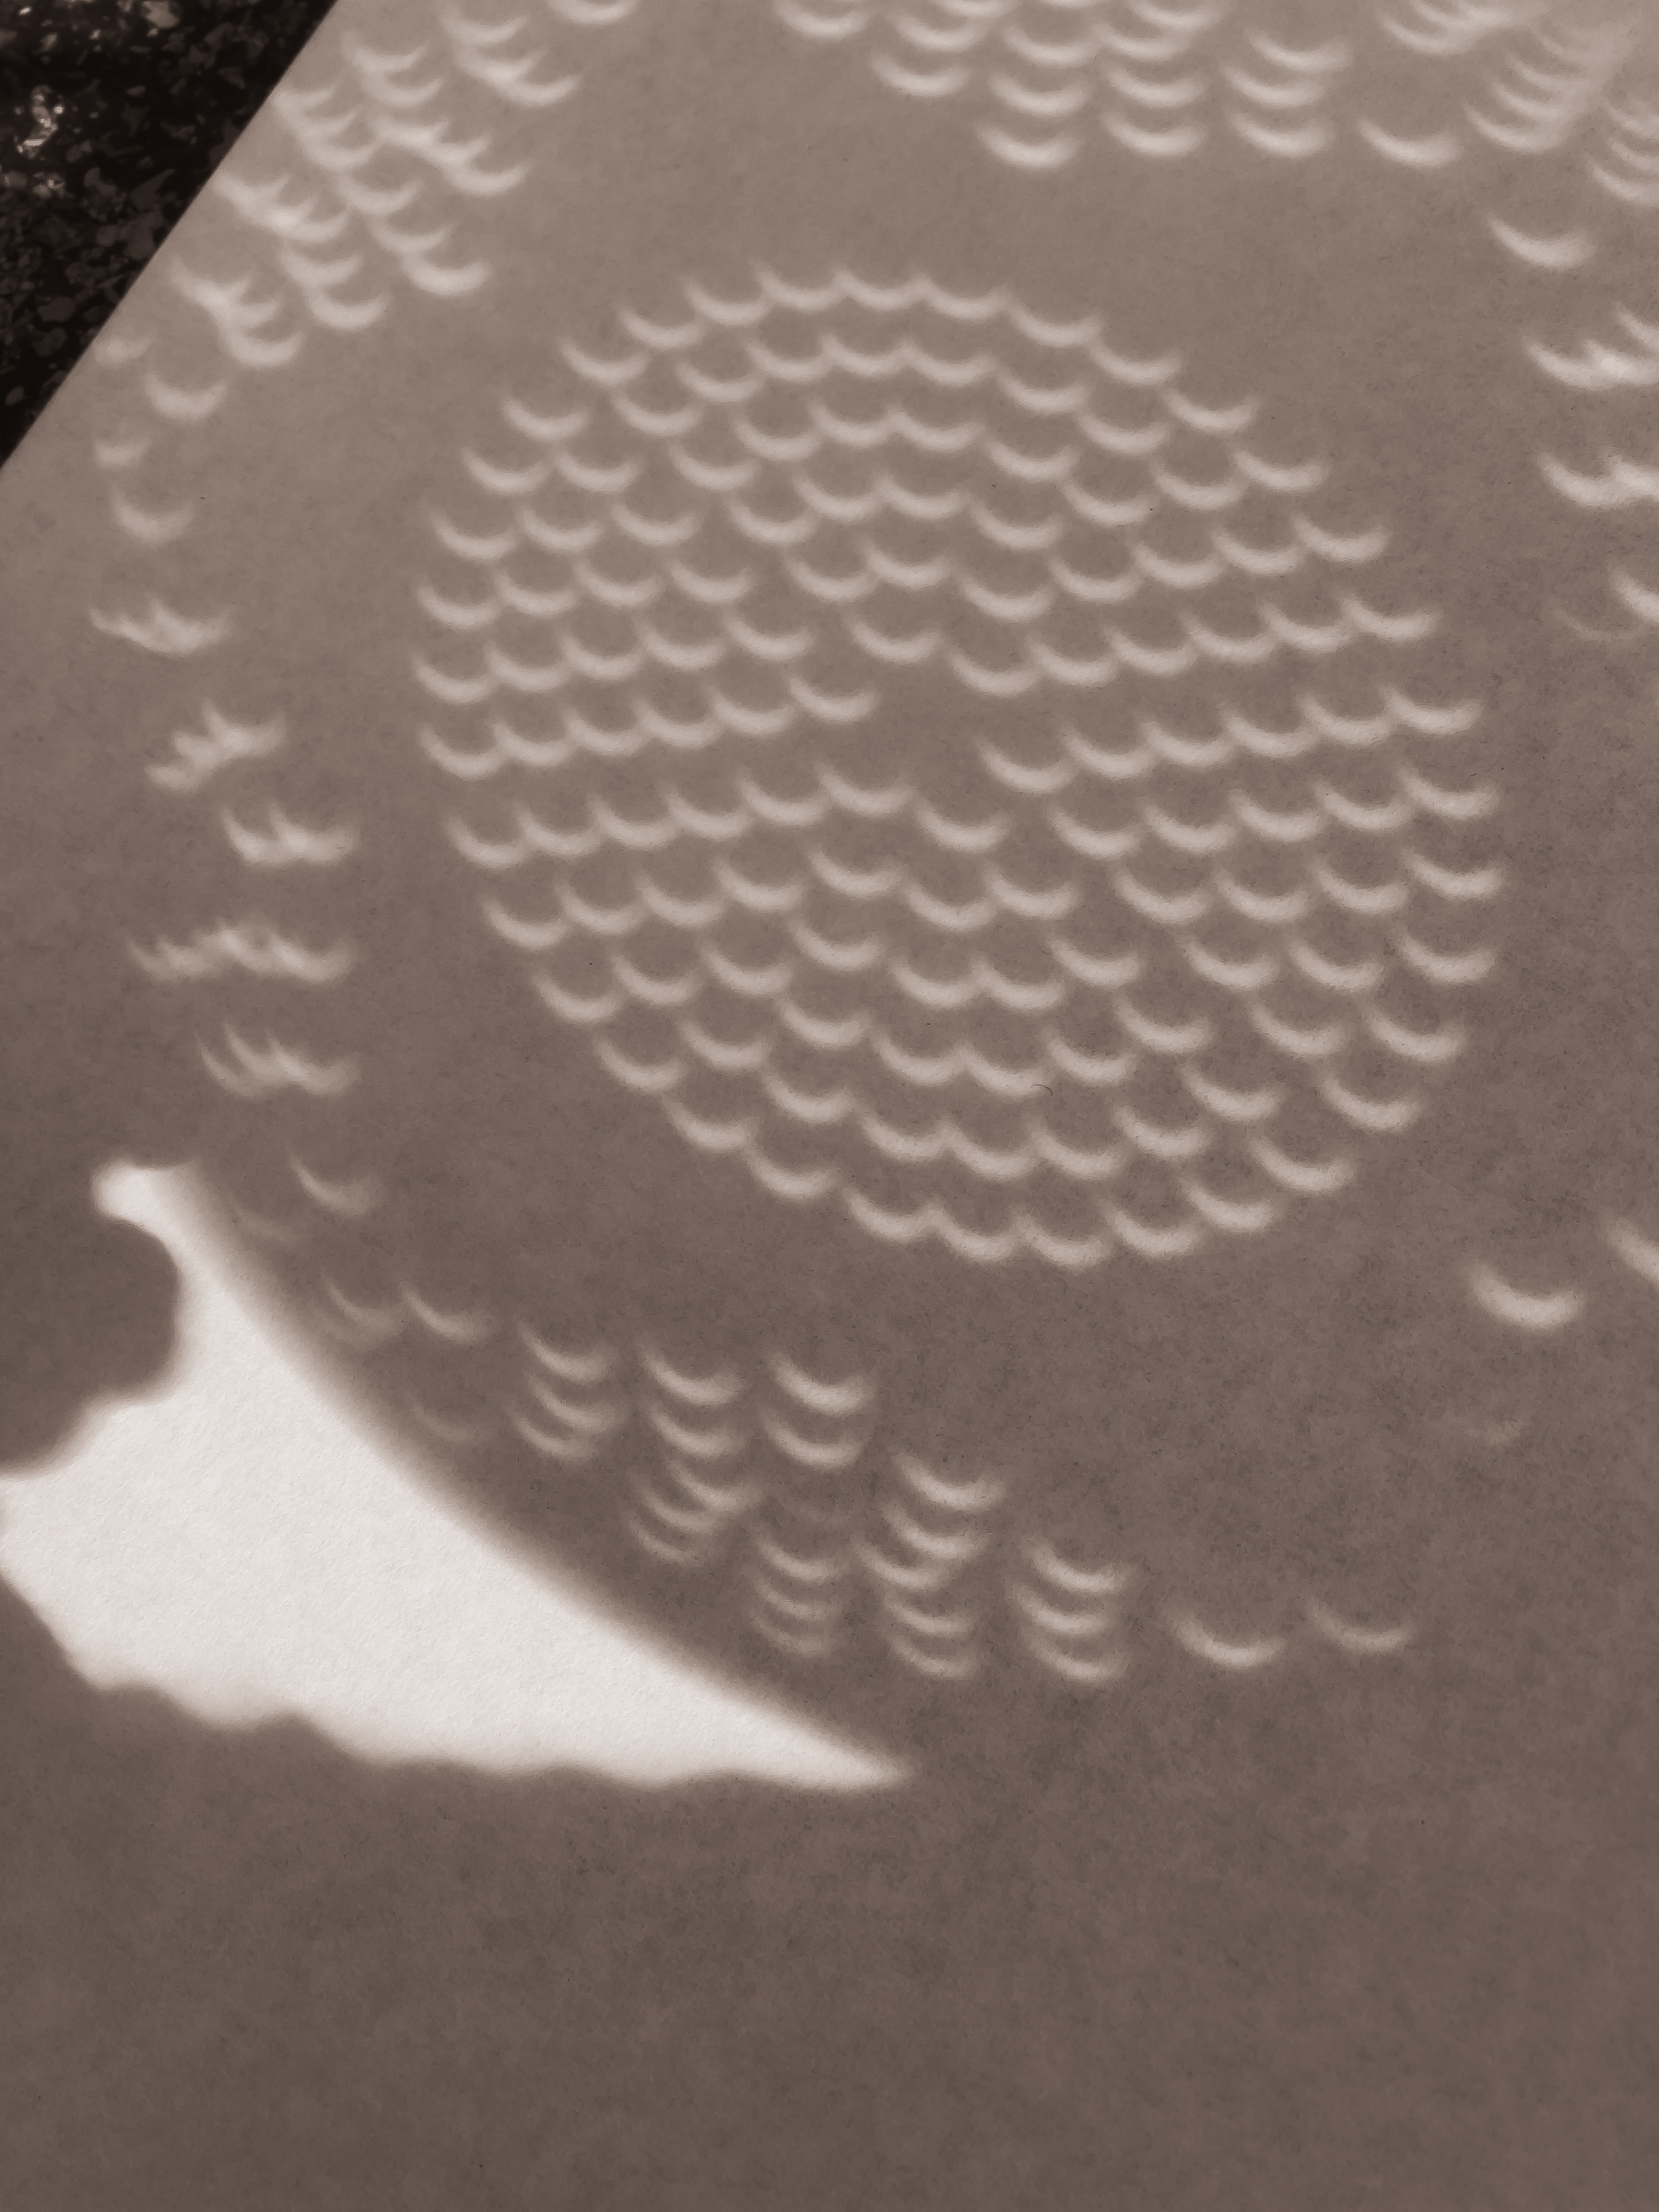 Eclipse projected onto a white background through the holes of a colander. Eclipse is close to totality.